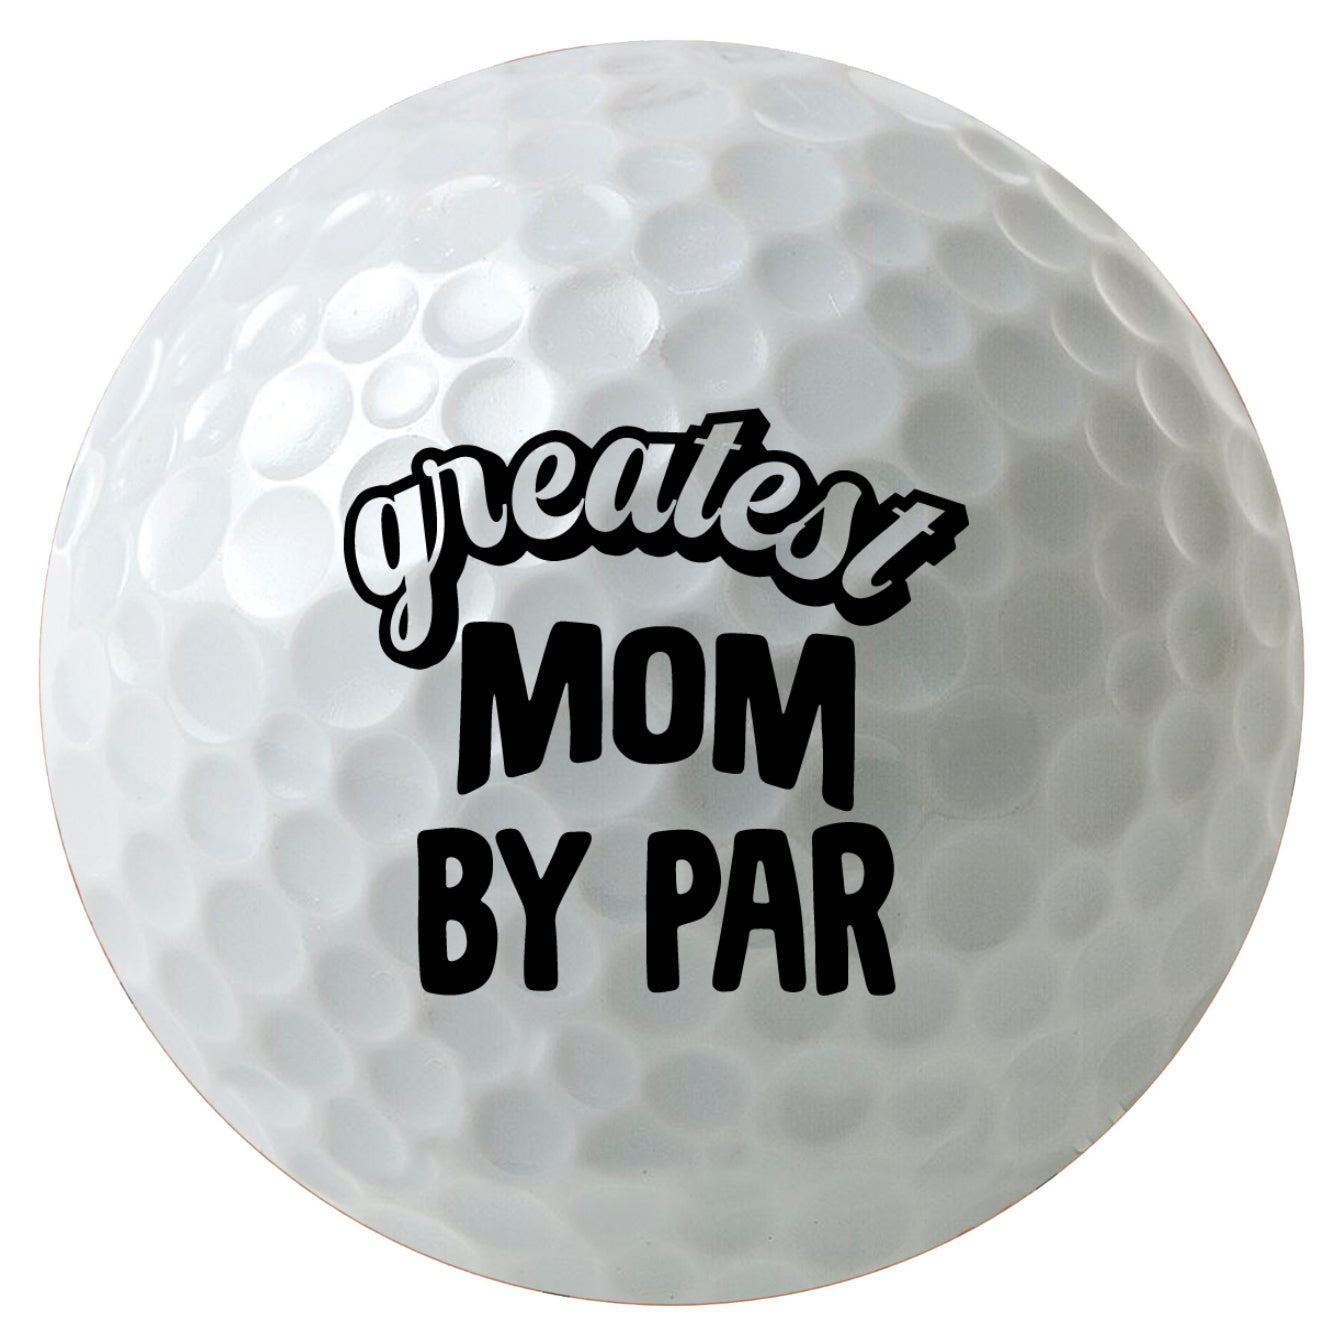 Greatest Mom by Par Golf Balls, Time to Par-Tee Golf Balls, 3-Pack Printed White Golf Balls